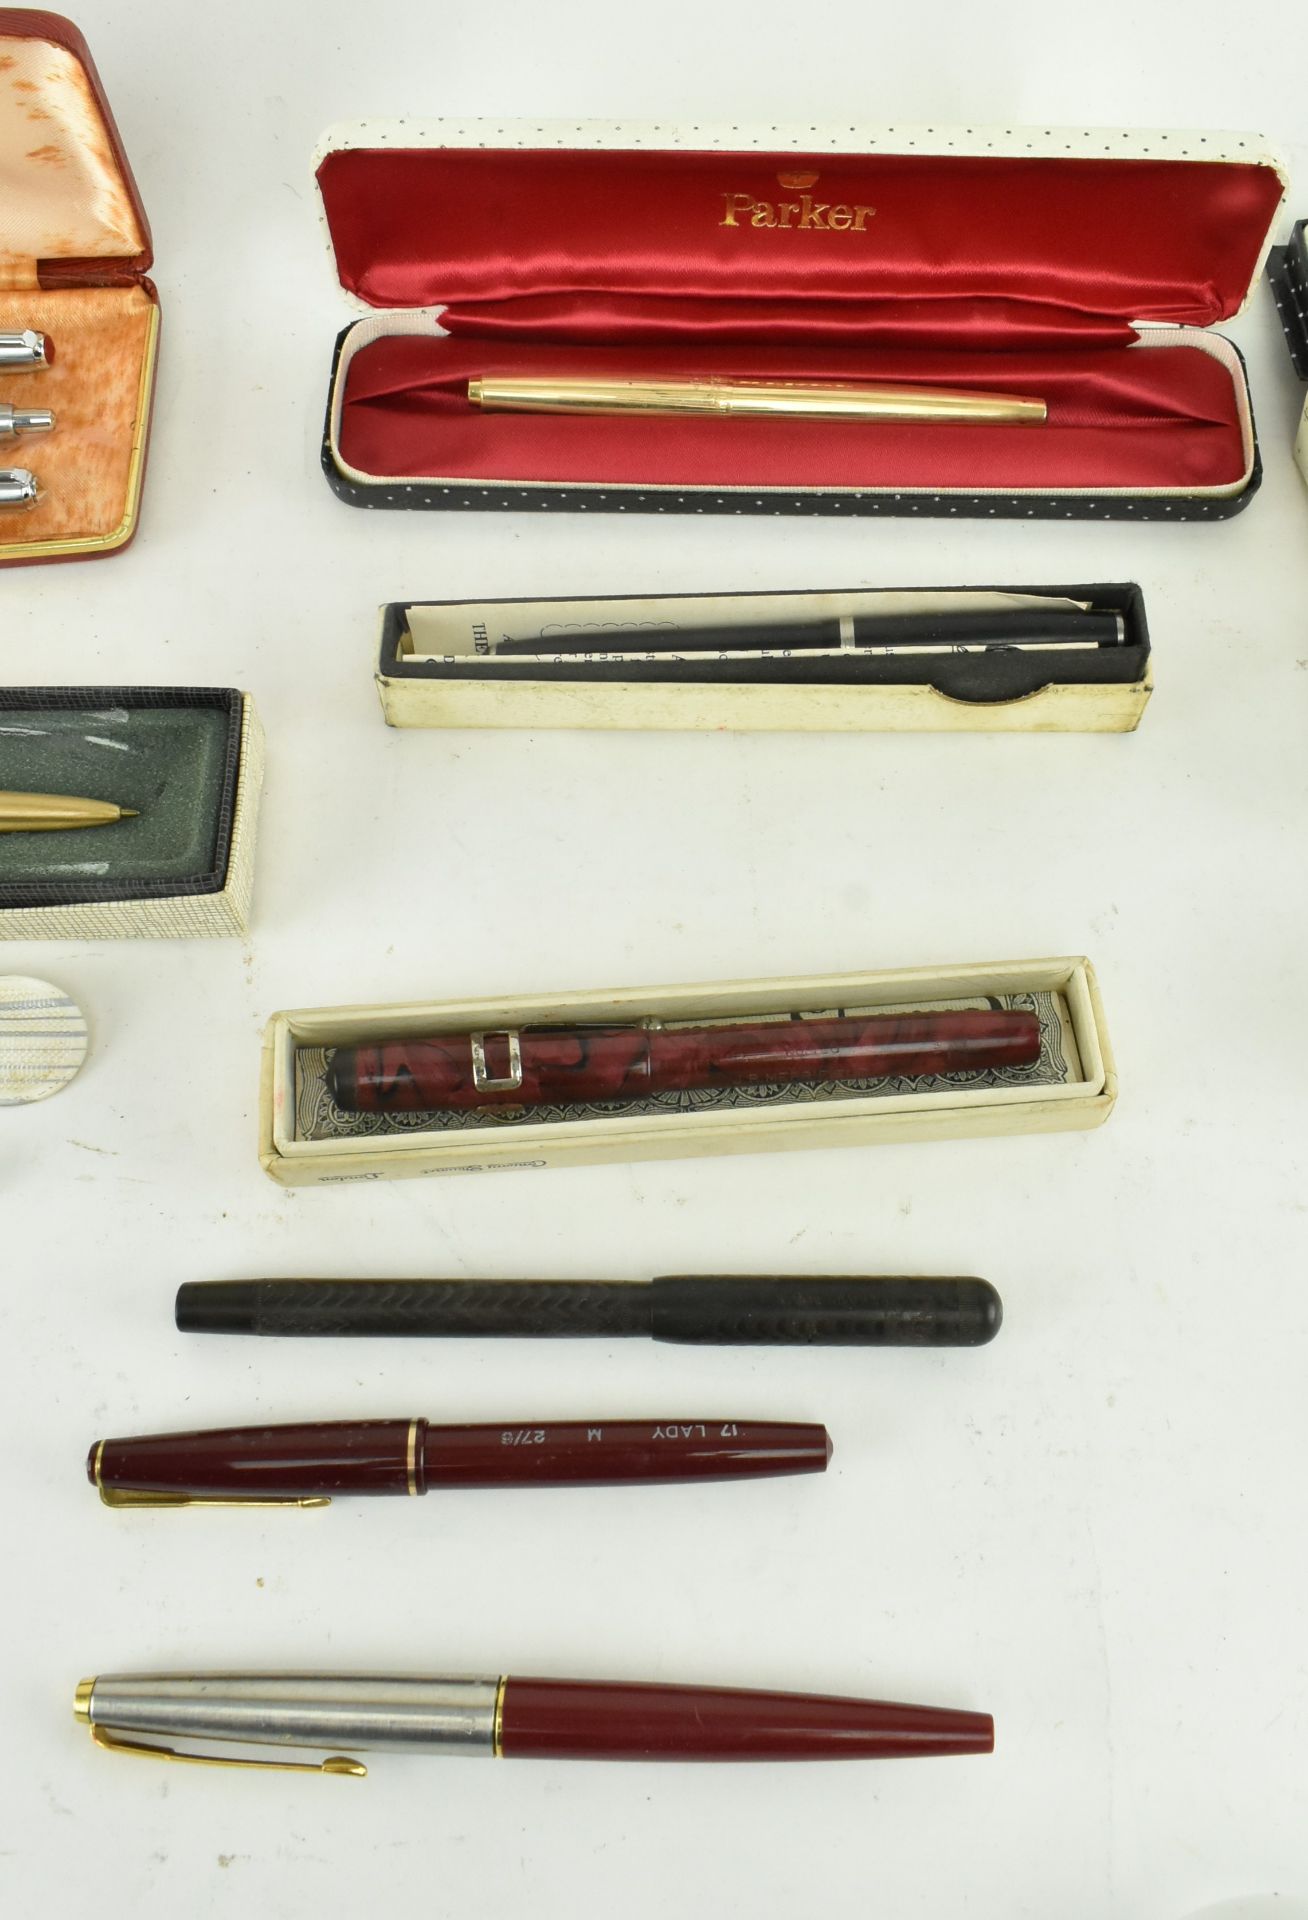 COLLECTION OF VINTAGE PENS INCL. PARKER, ESTERBROOK & OTHERS - Image 3 of 6